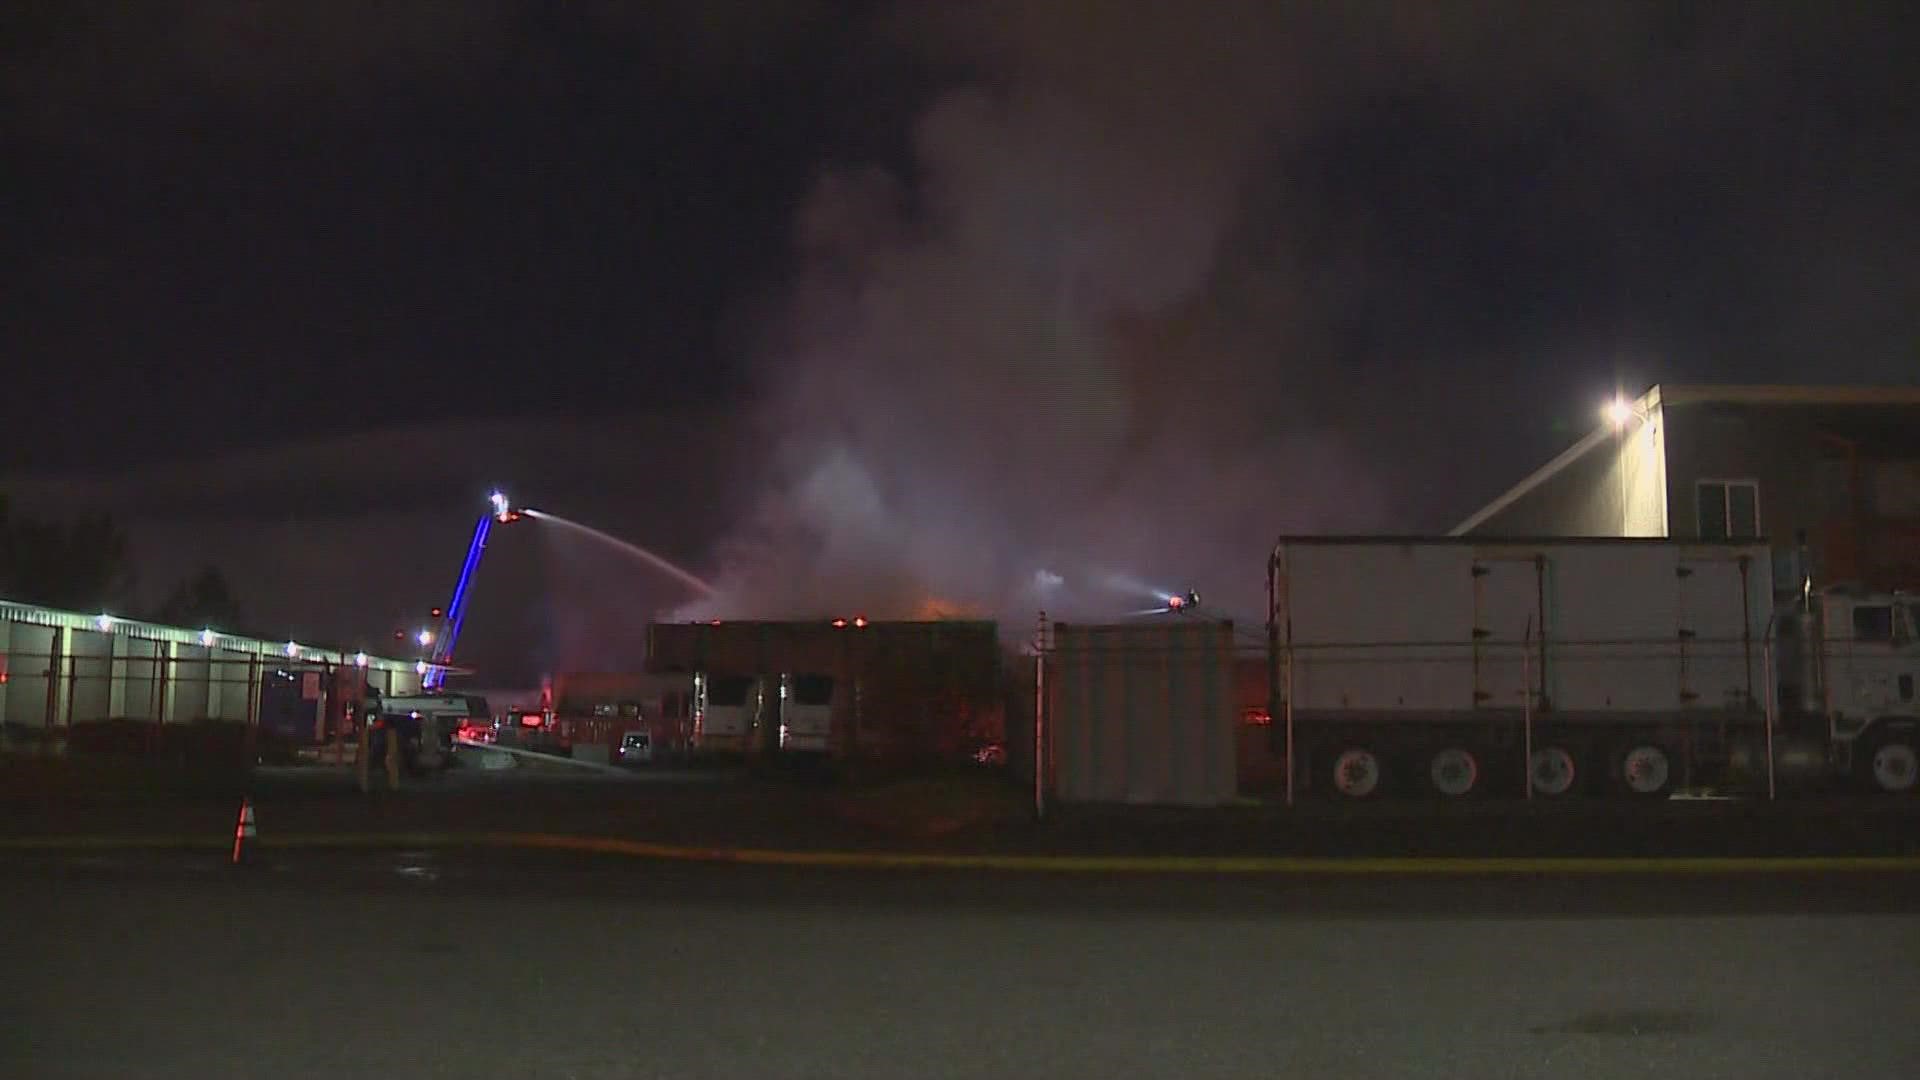 A fire that broke out overnight Friday at a Fife warehouse has left it a total loss, according to the Tacoma Fire Department.